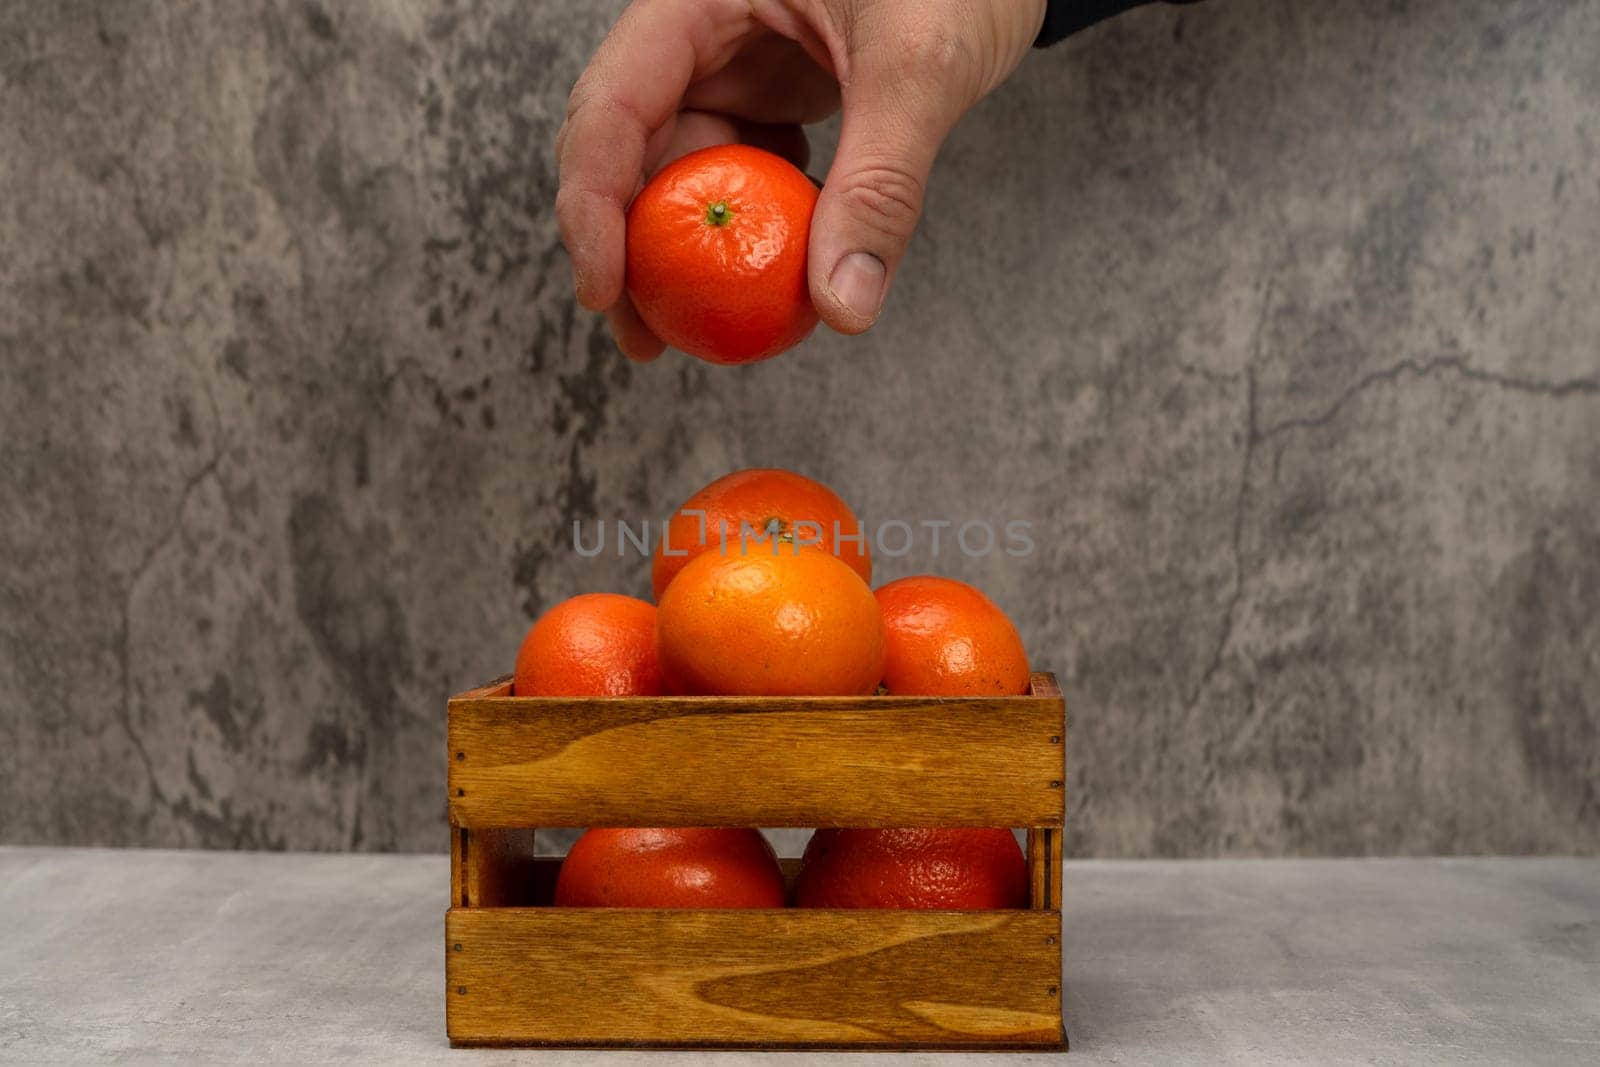 Man's hand picking an orange from a beautiful wooden basket with some ripe oranges in a still life with gray background, healthy living concept. Superfood rich in vitamin C.